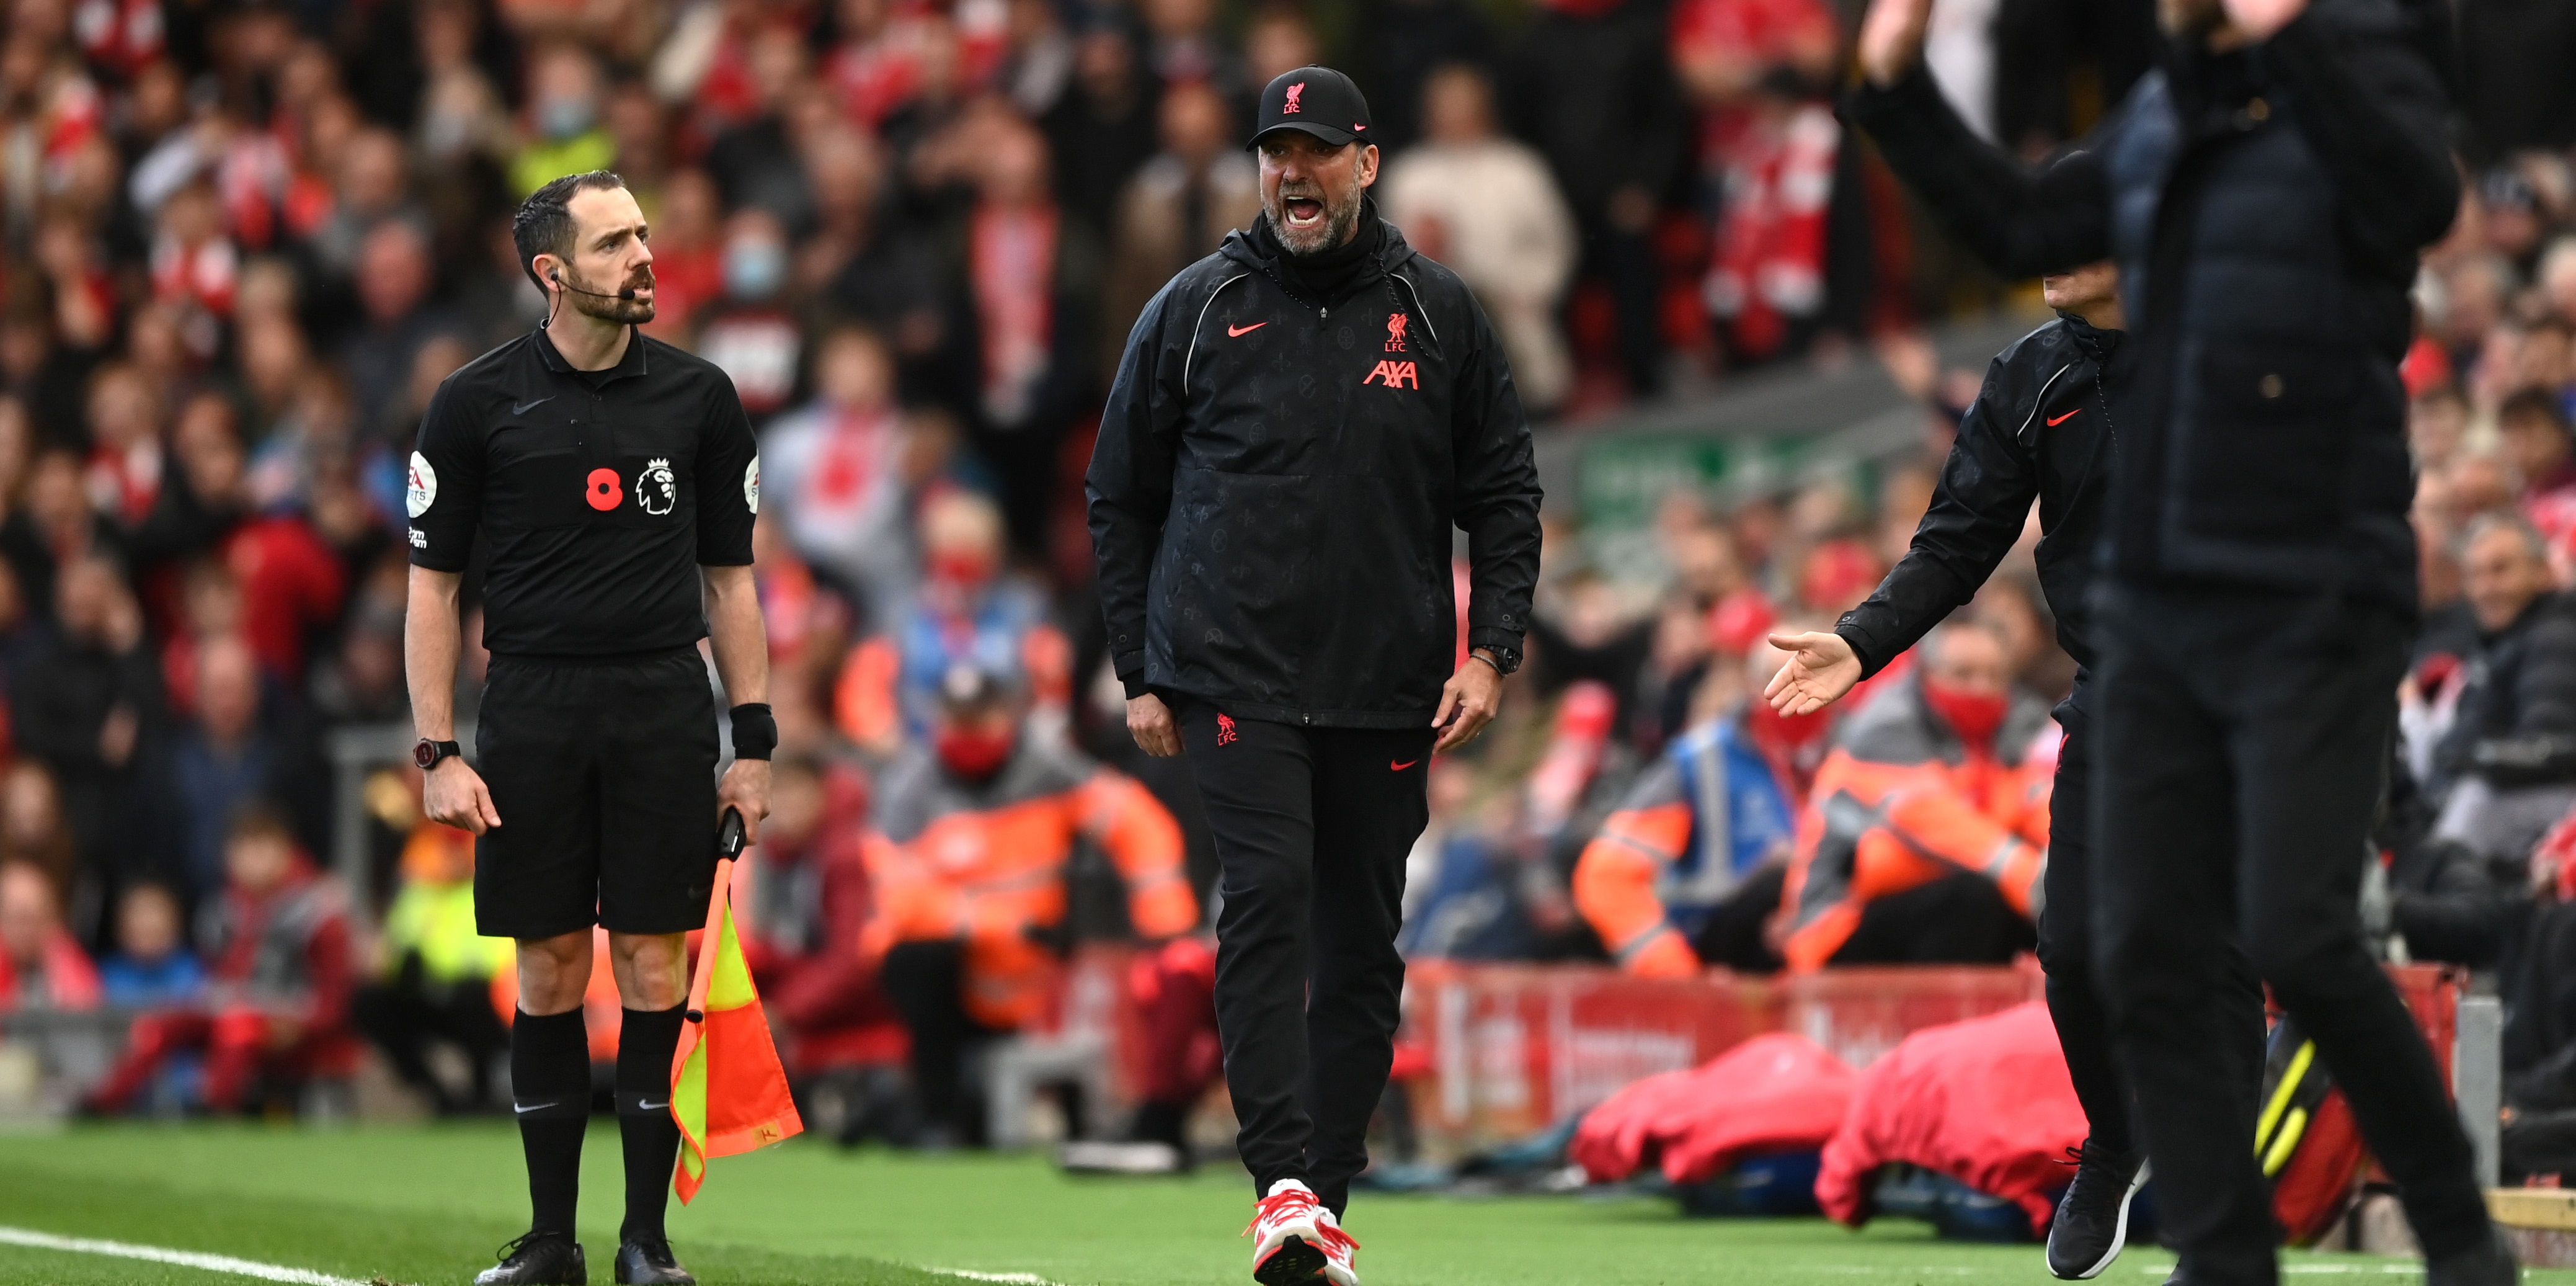 Jurgen Klopp believes stopping the Premier League is ‘probably not the right thing’ but insists more flexibility is needed around the fixture schedule